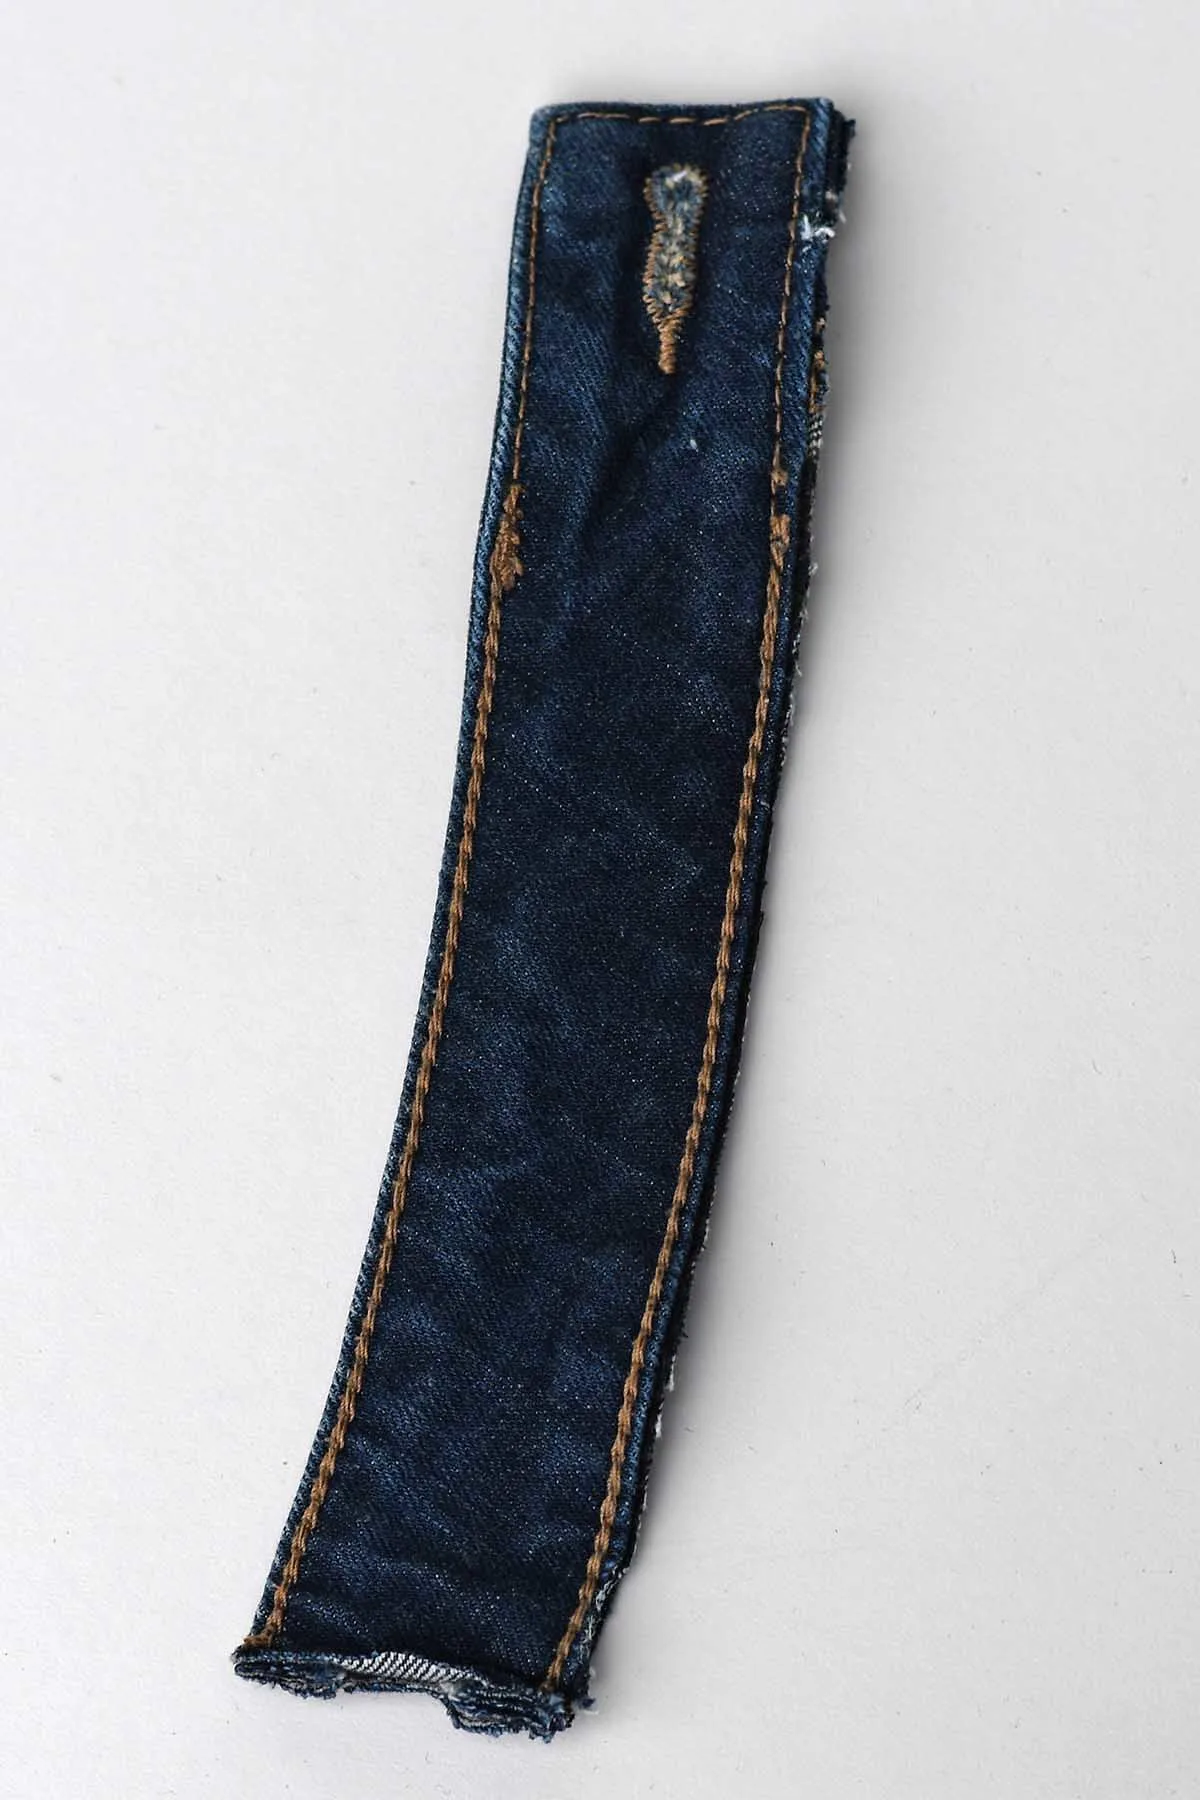 An 8" long cut piece of jeans waistband with button hole